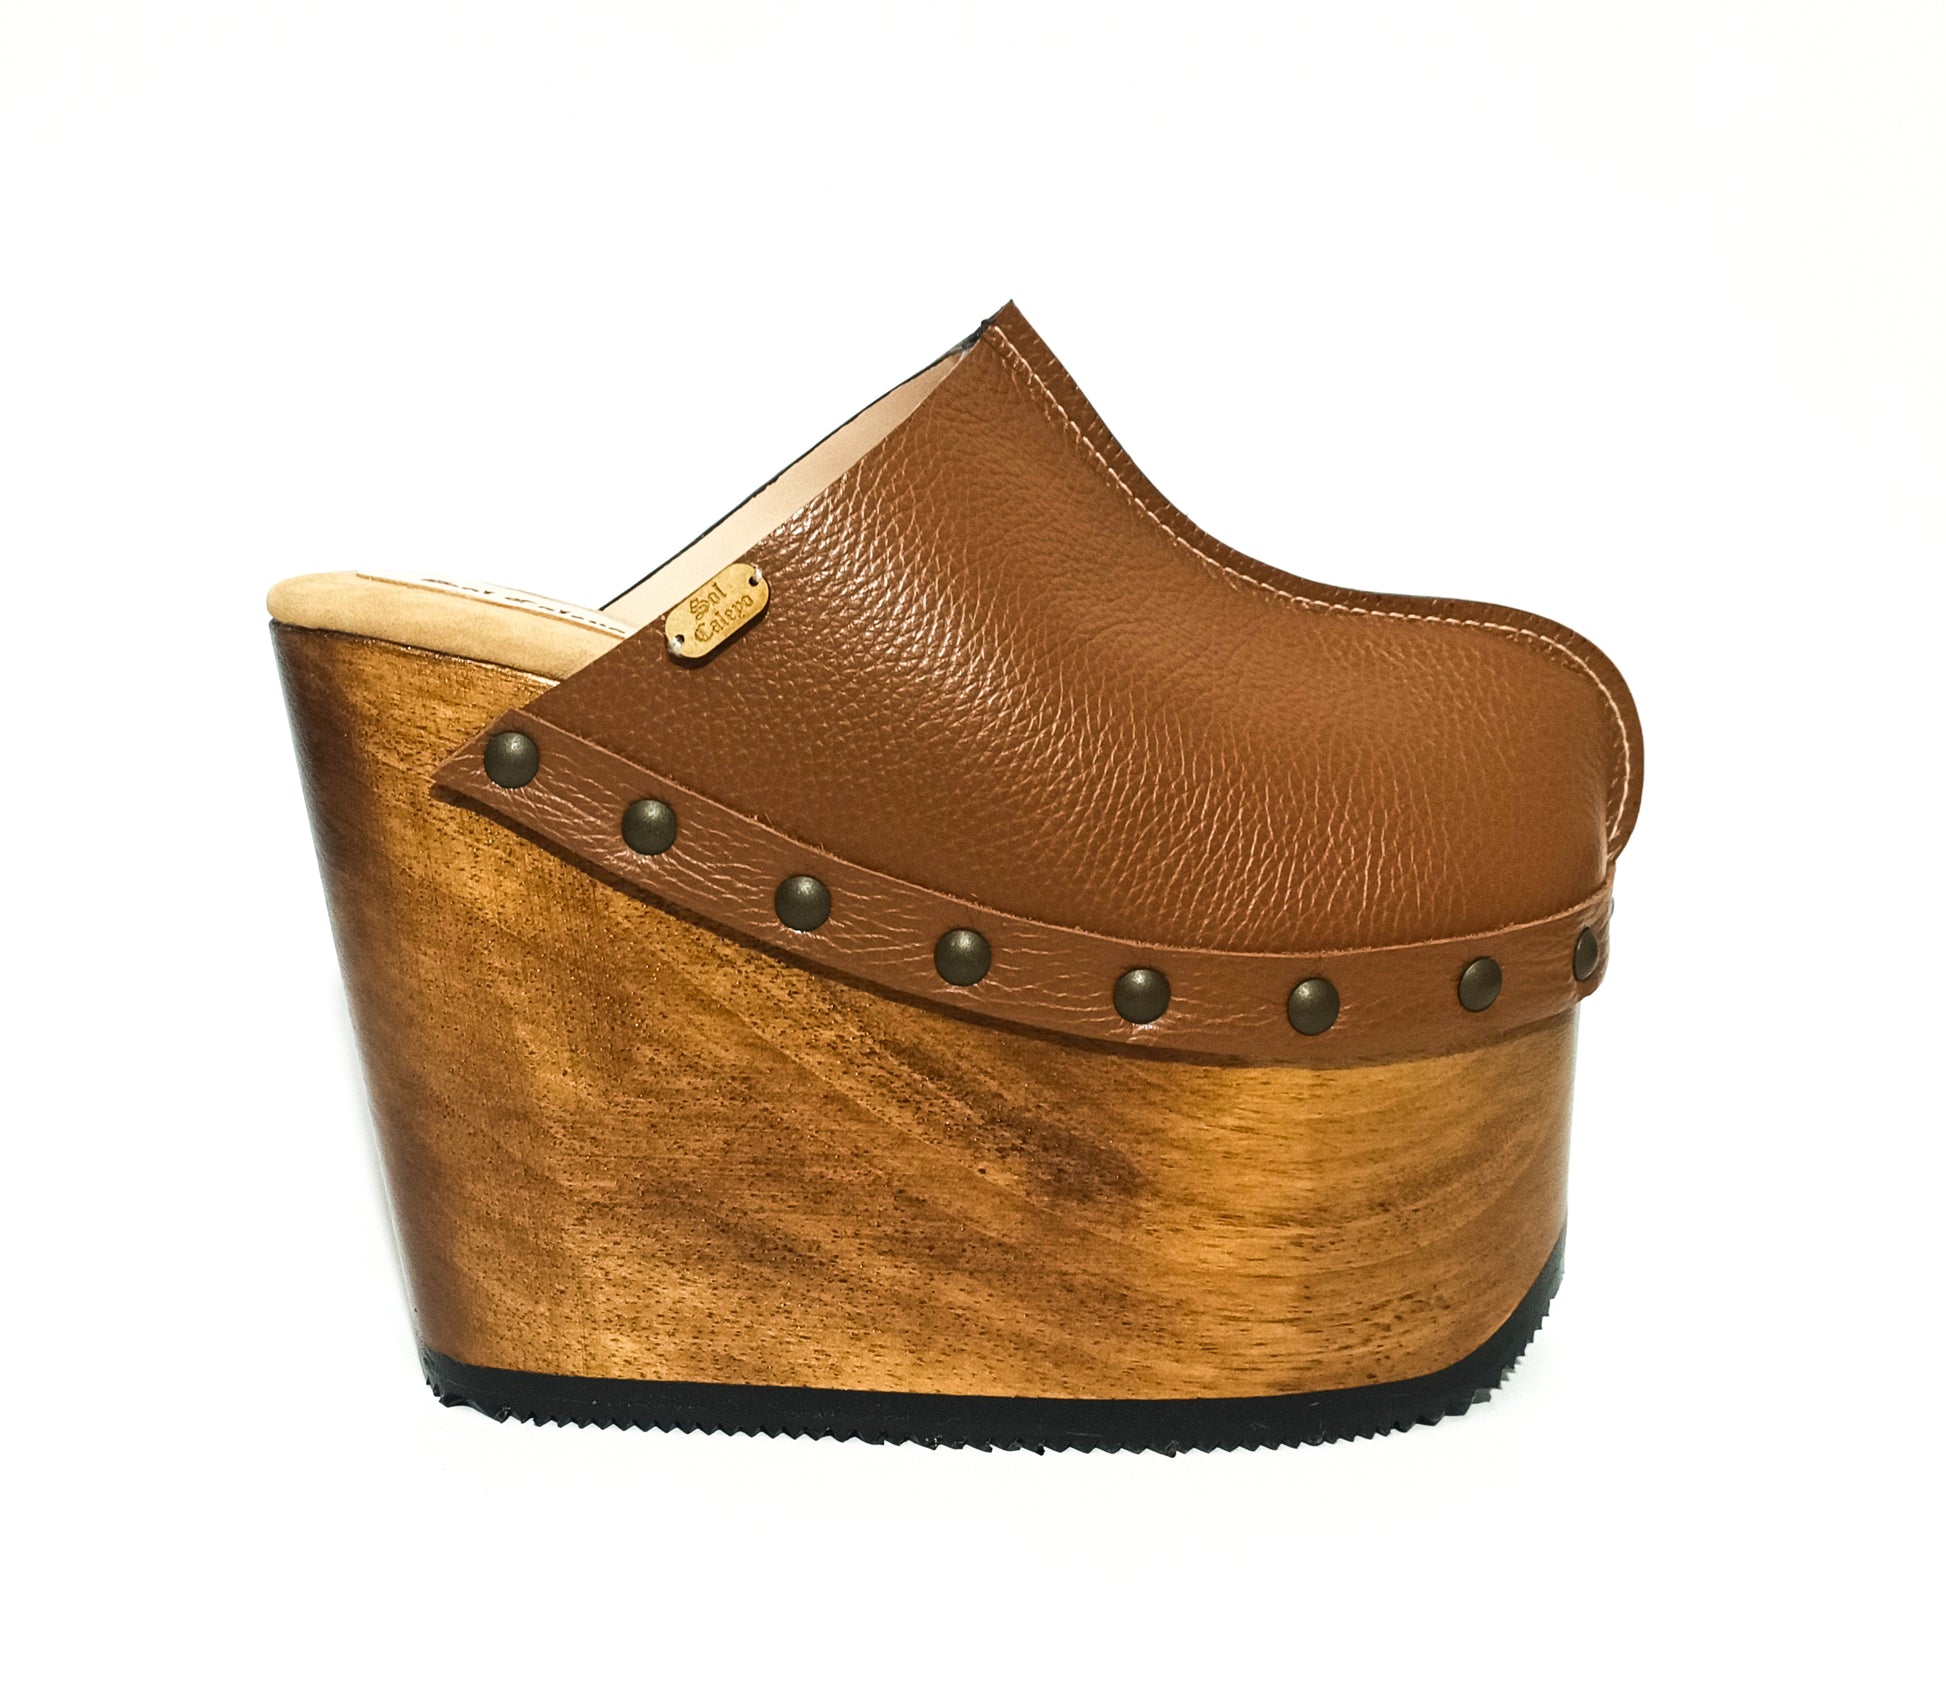 Vintage inspired, 70s style platform clogs with super high heels. Super high wooden wedge made in closed leather. Size from 34 to 47. Handmade to order. The Chicago Clogs are an exclusive design by Sol Caleyo.